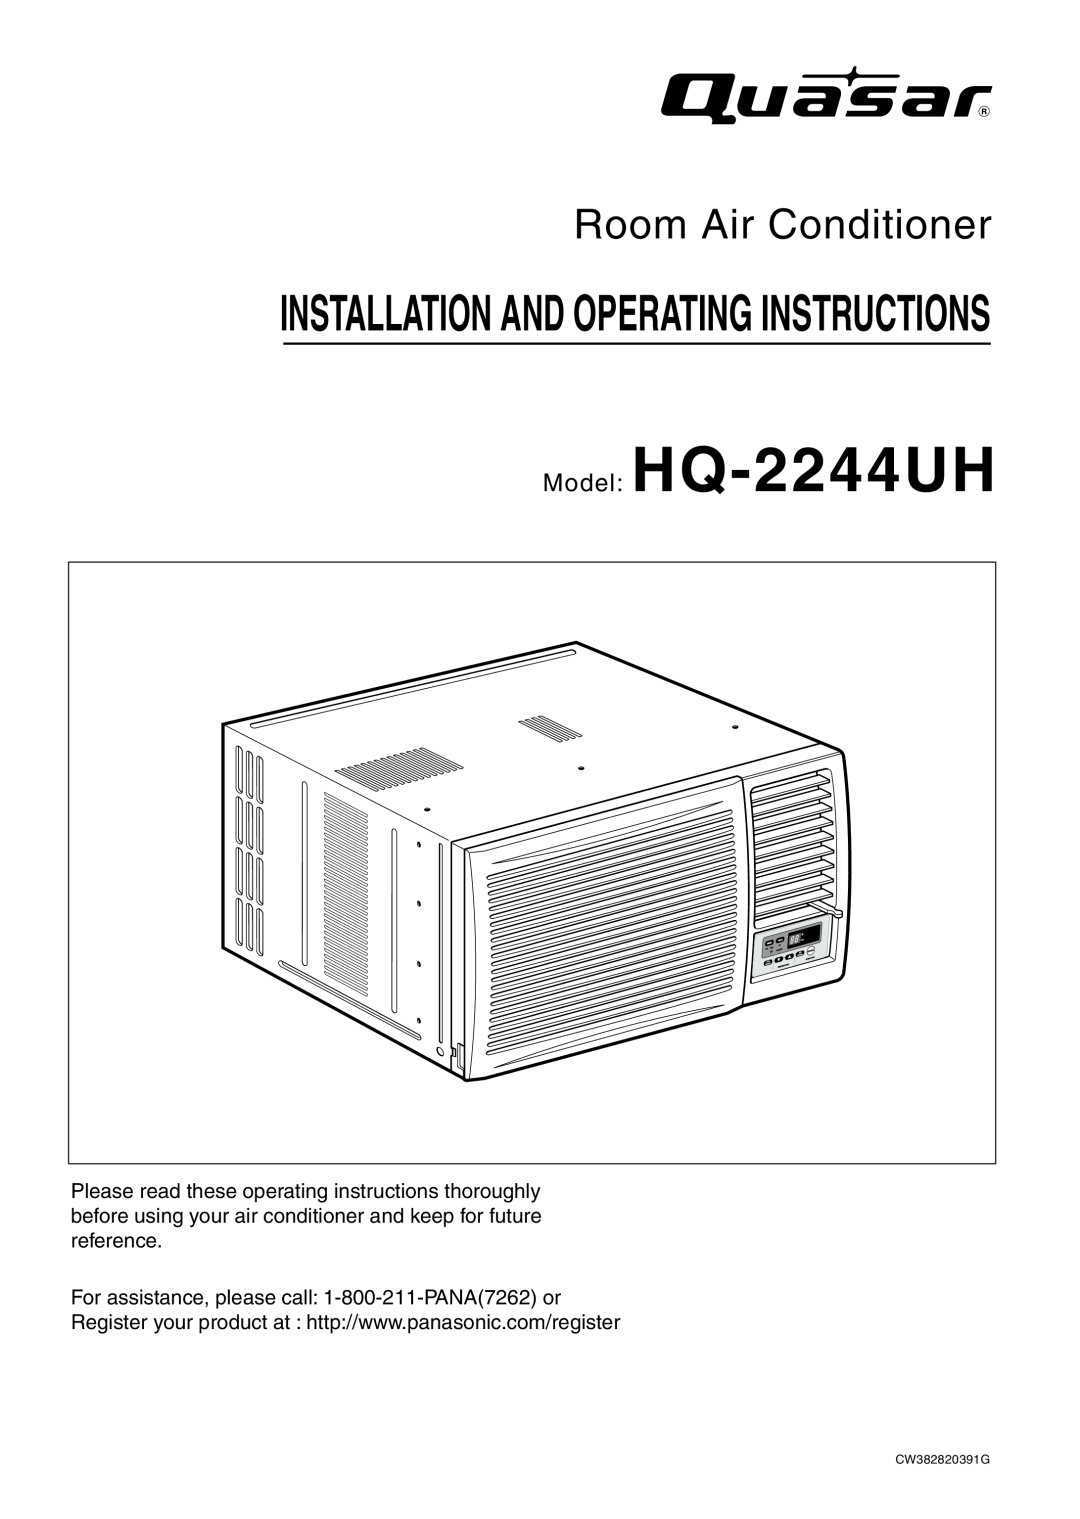 Quasar operating instructions Installation And Operating Instructions, Model HQ-2244UH, Room Air Conditioner 